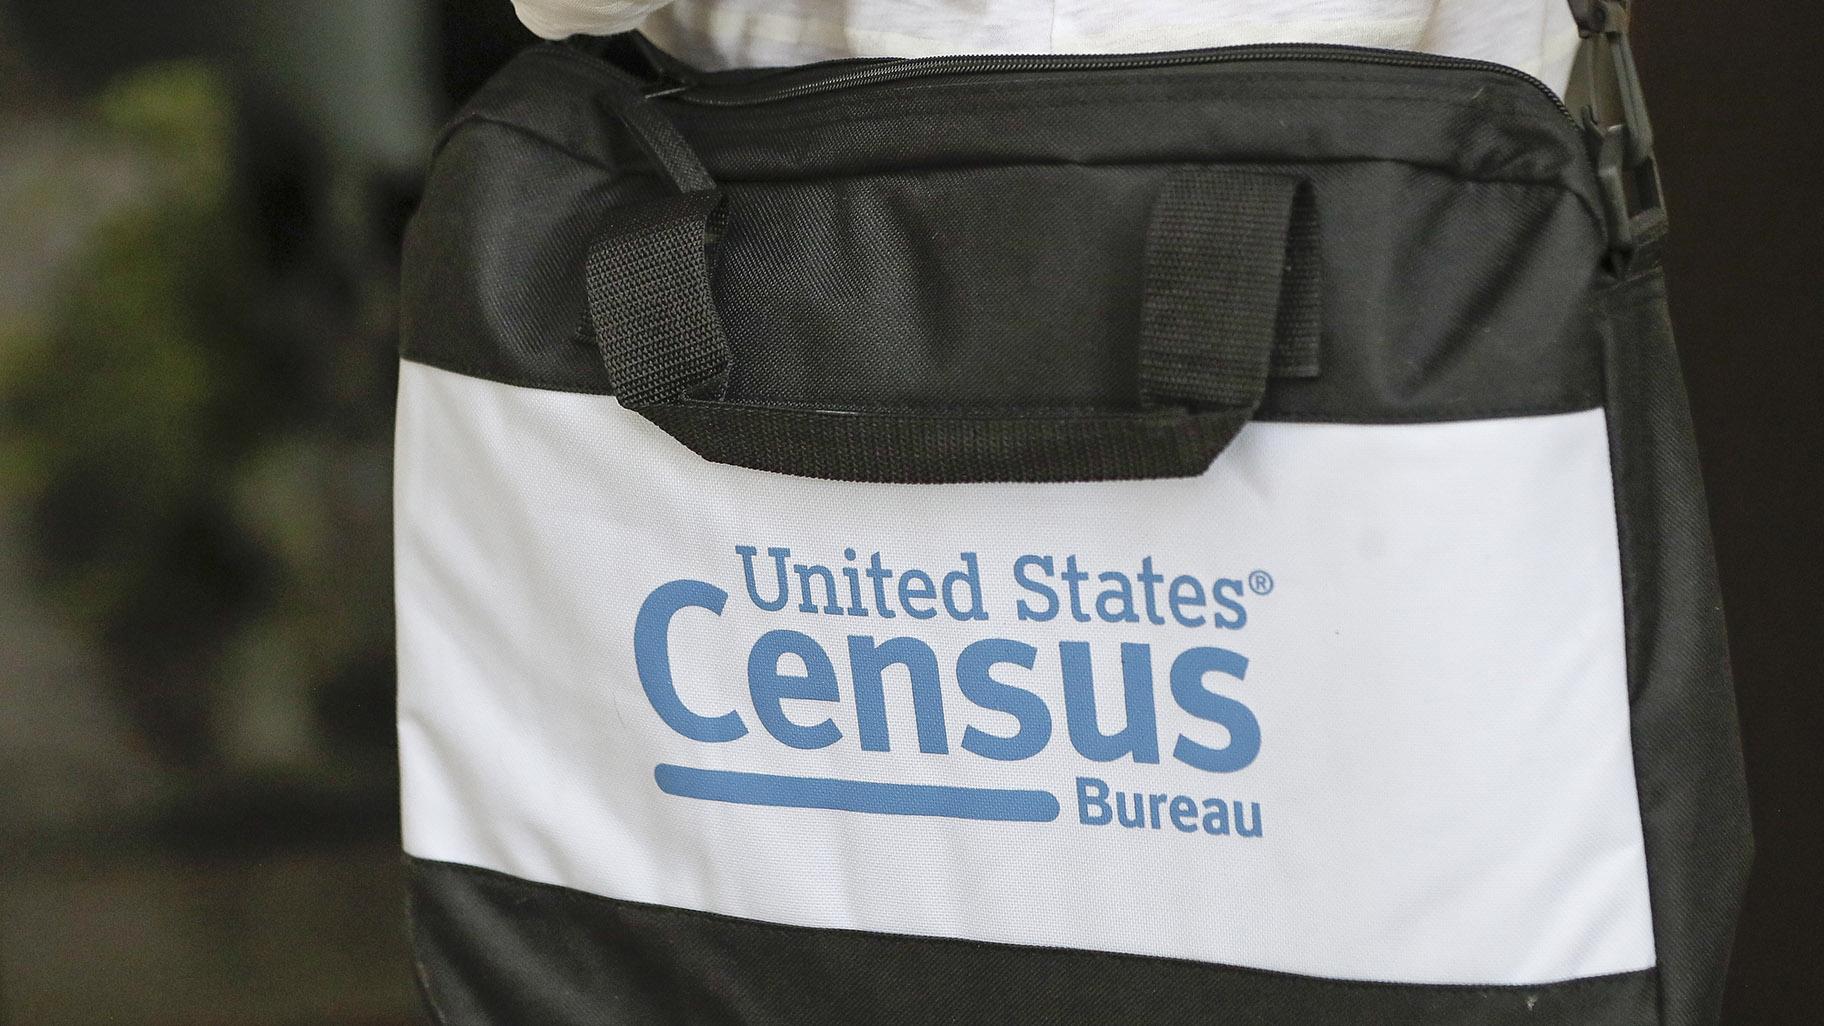 The briefcase of a census taker is seen as she knocks on the door of a residence, Aug. 11, 2020, in Winter Park, Fla. (AP Photo / John Raoux, File)